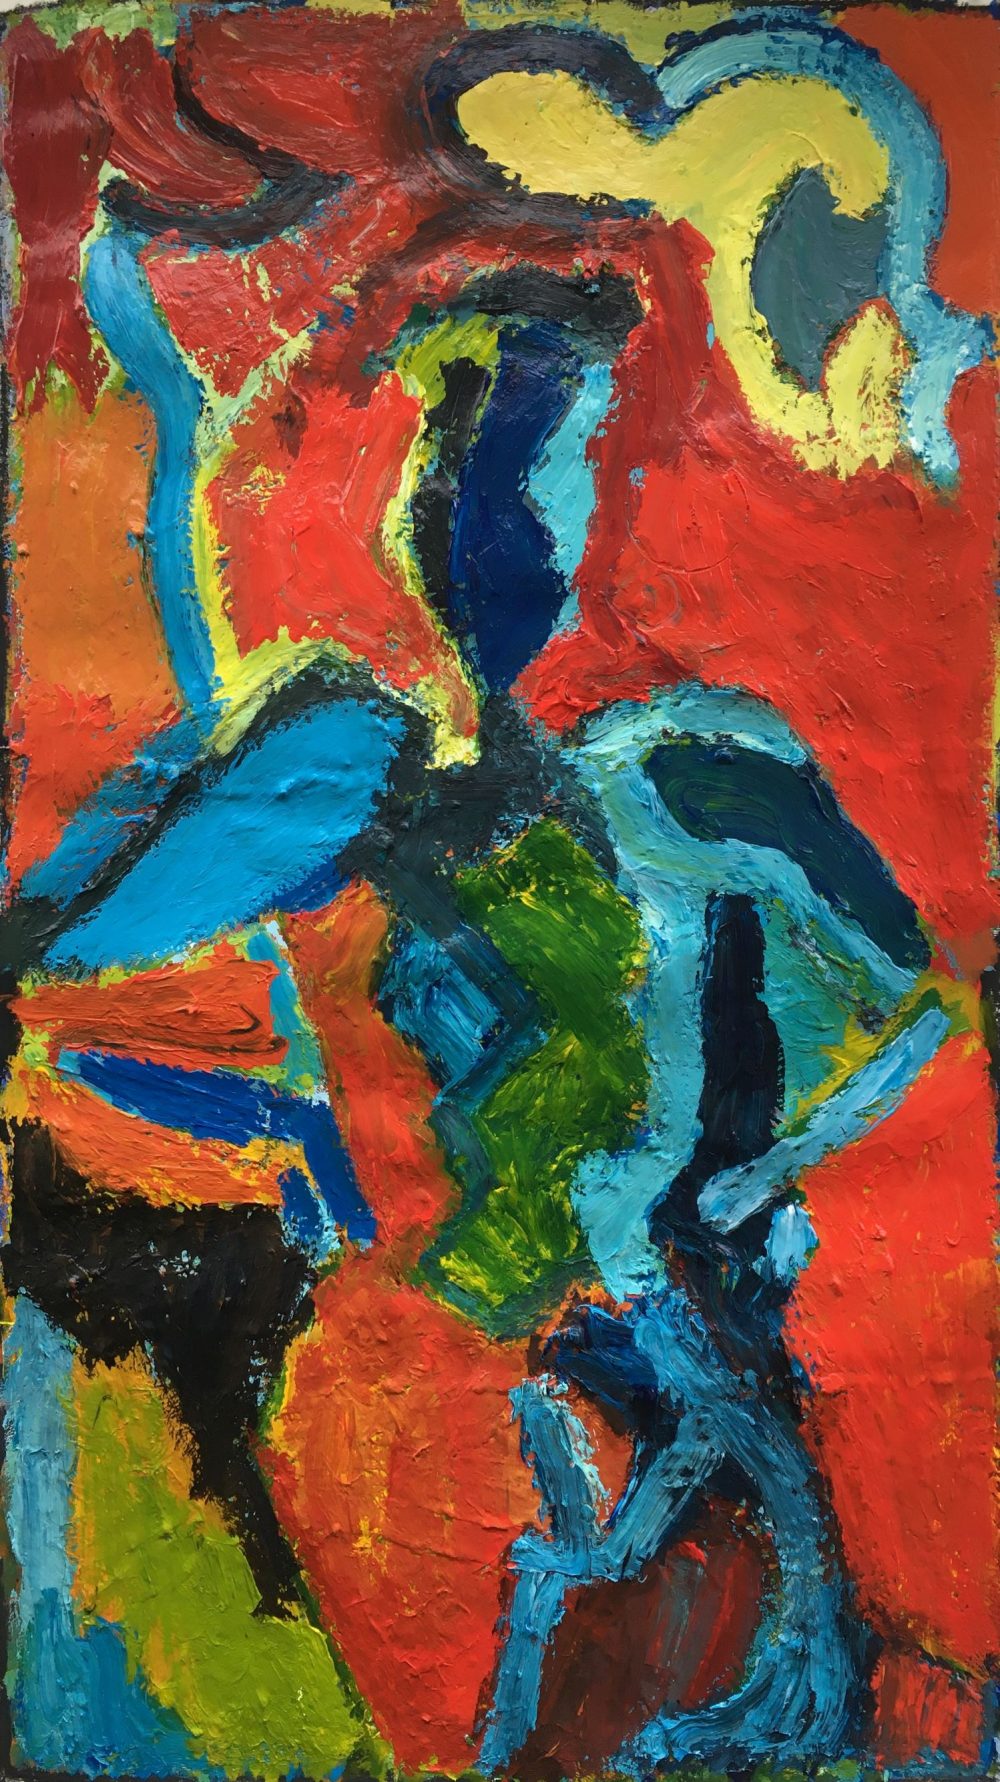 Abstracted human figure in blue with reds, oranges, yellows and greens forming the abstract background.